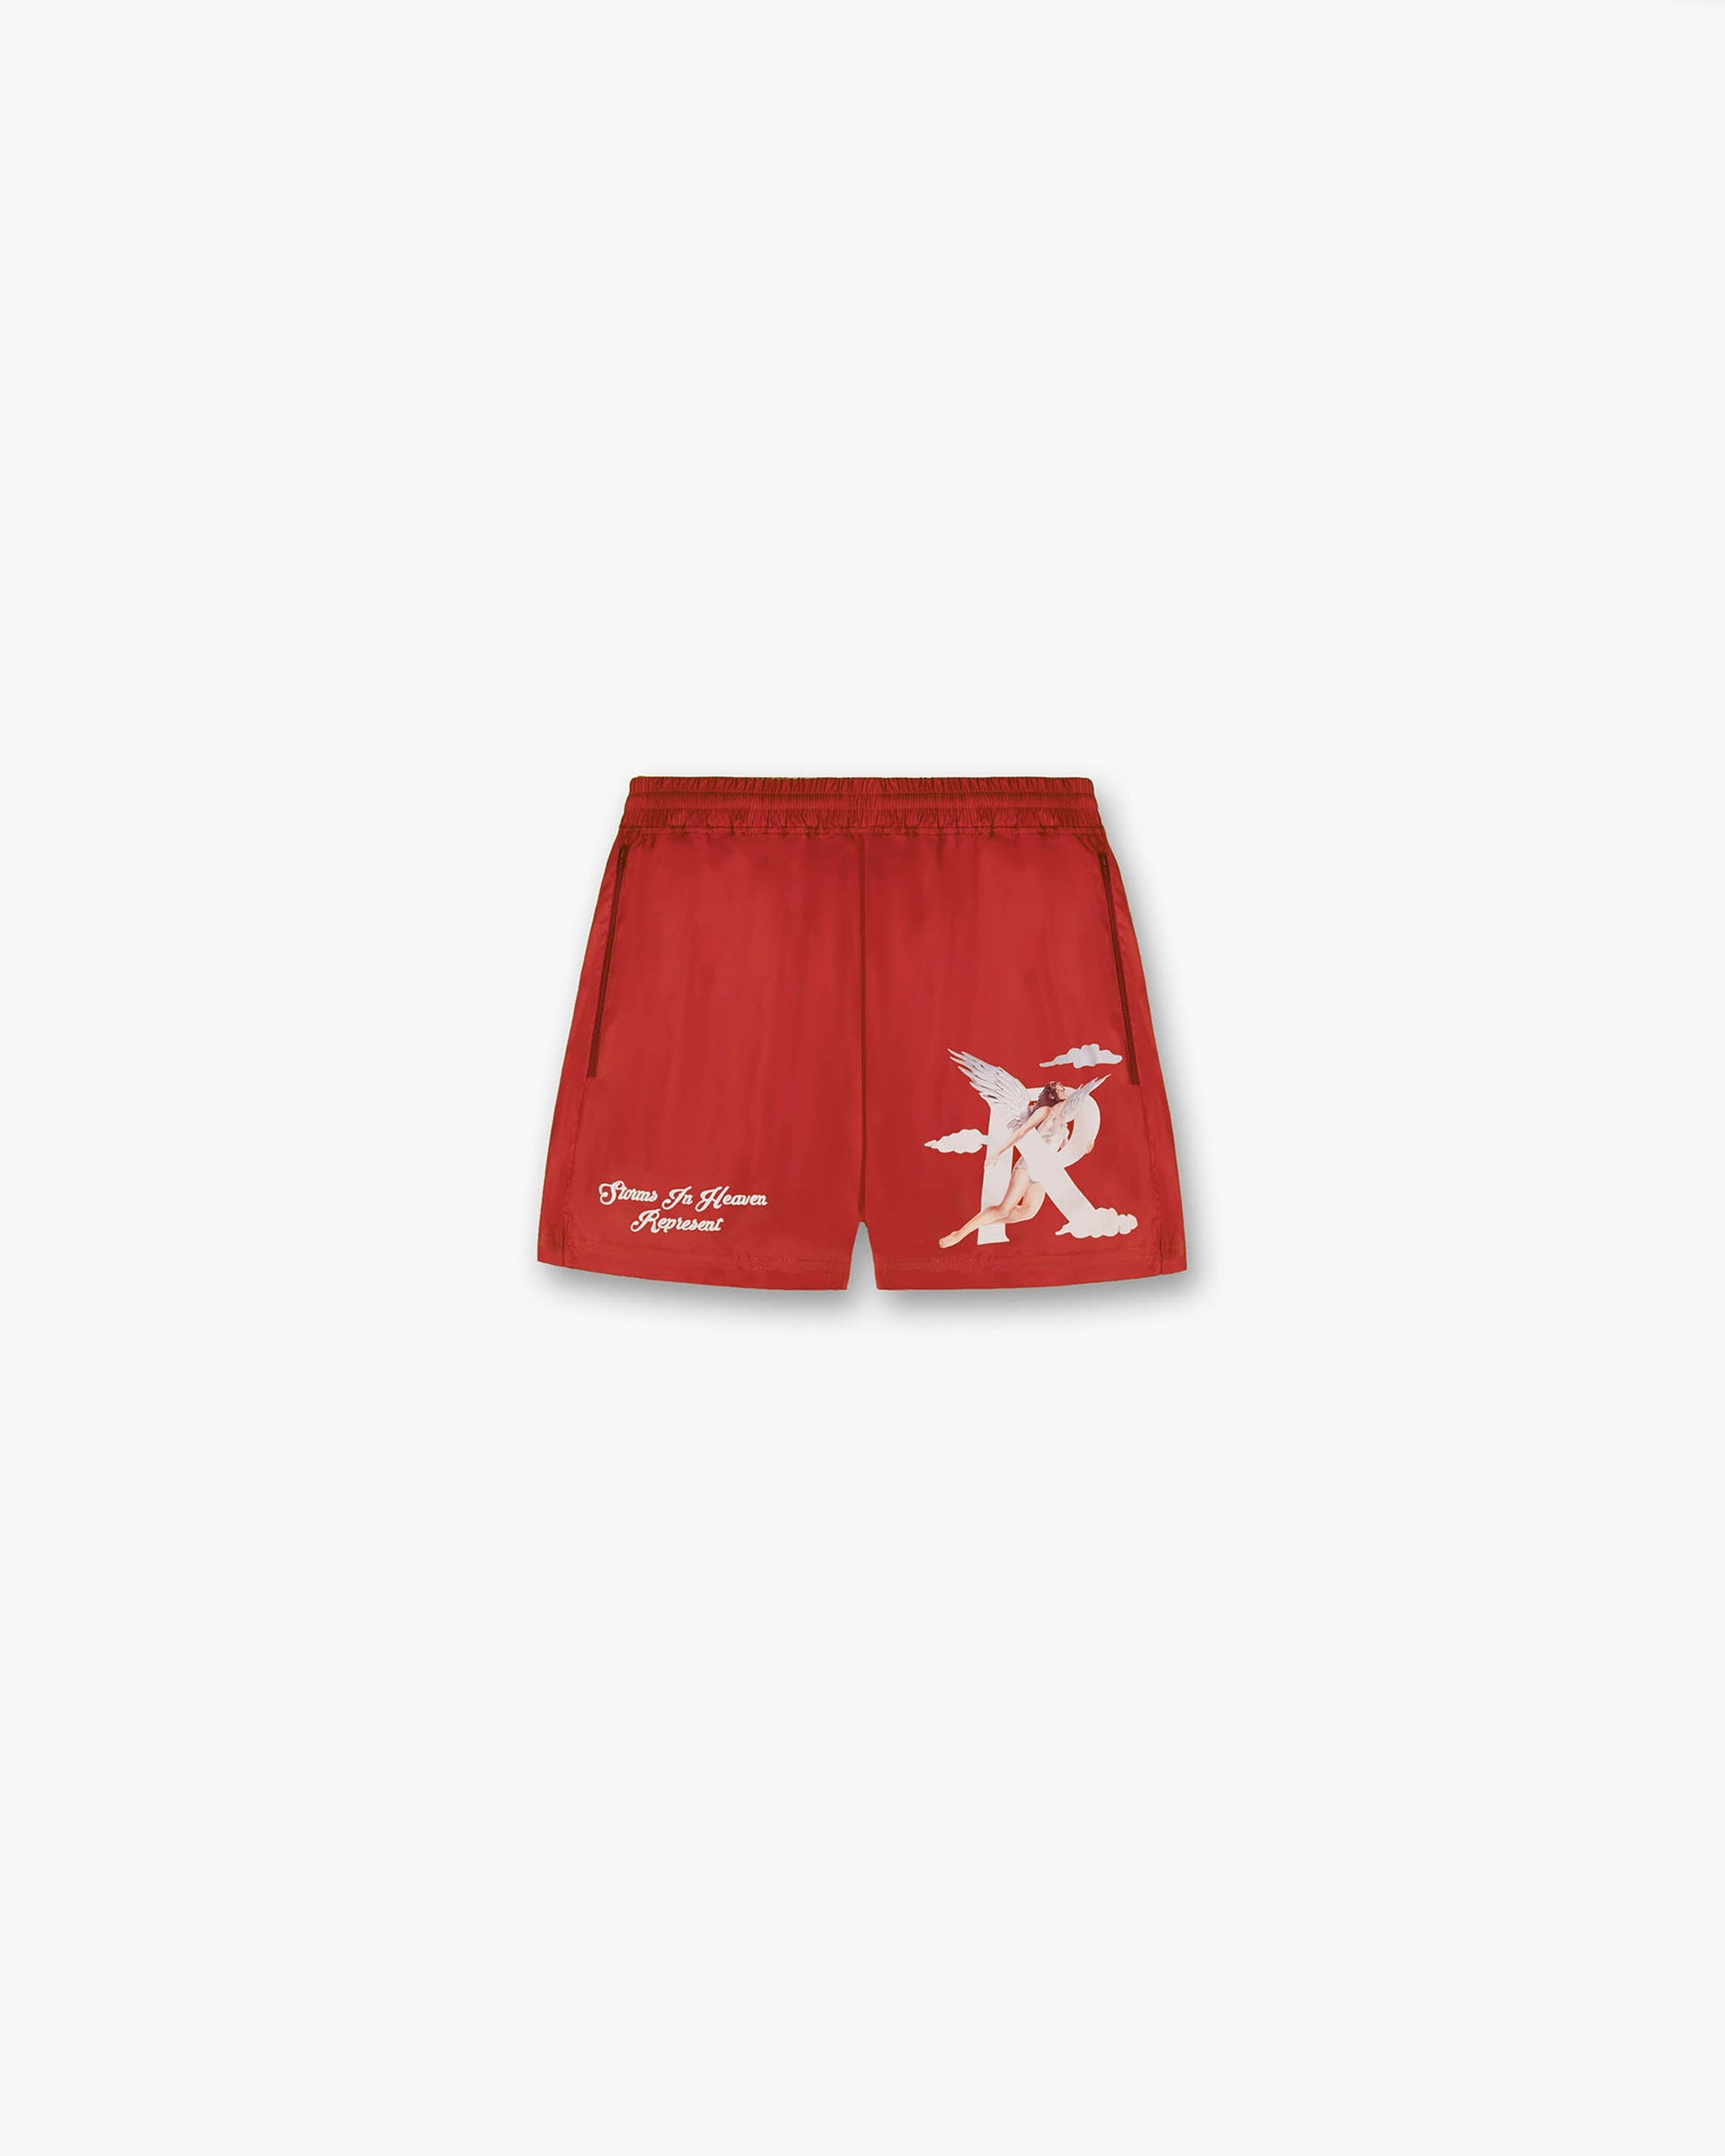 Storms In Heaven Shorts | Burnt Red Shorts SS23 | Represent Clo